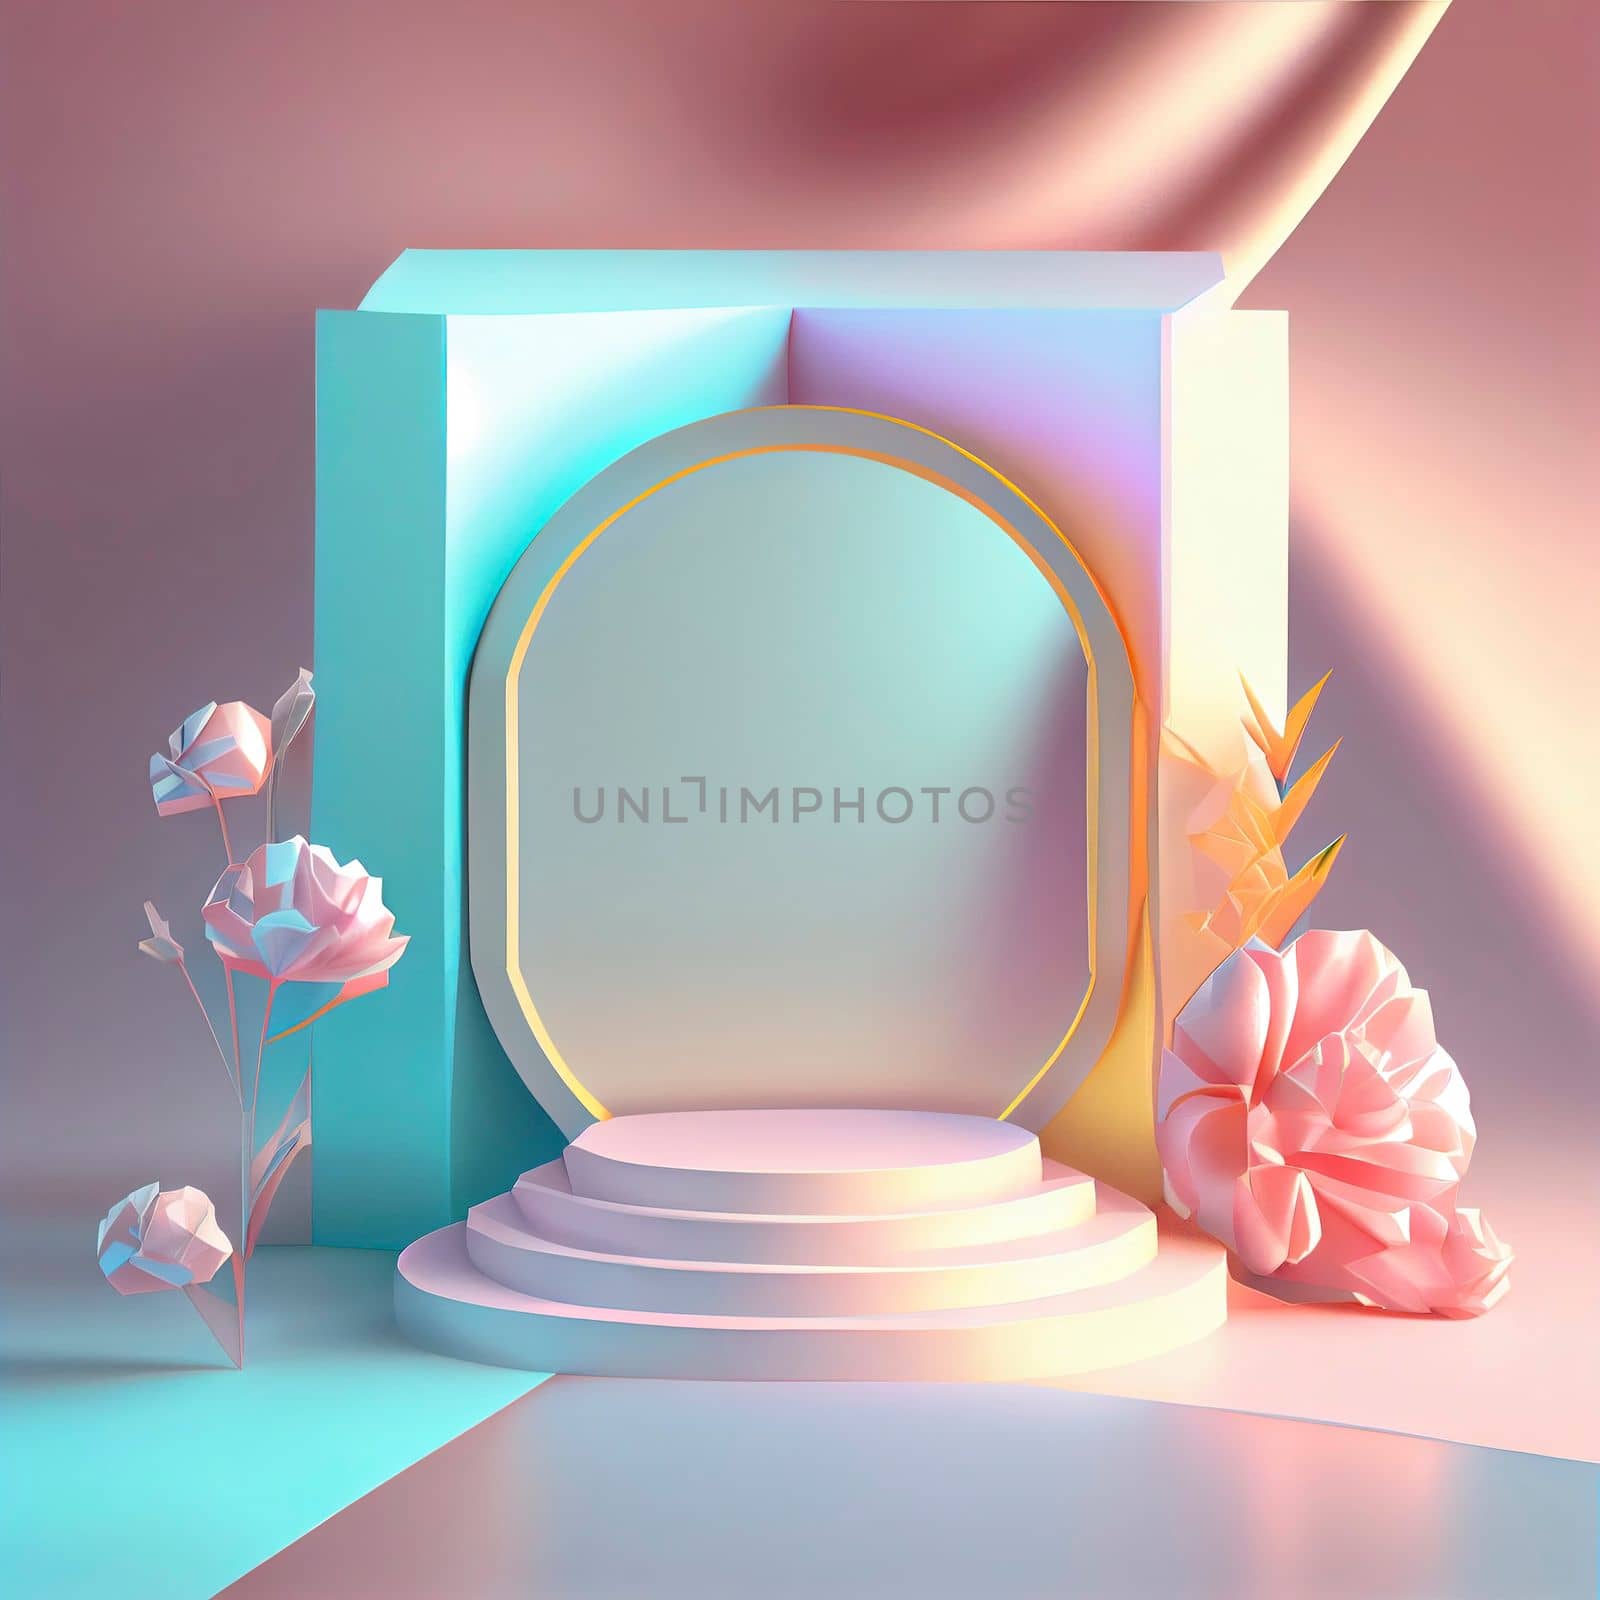 Luxury podium 3d illustration with elegant pink color and abstract flower wreath ornament for product display by templator